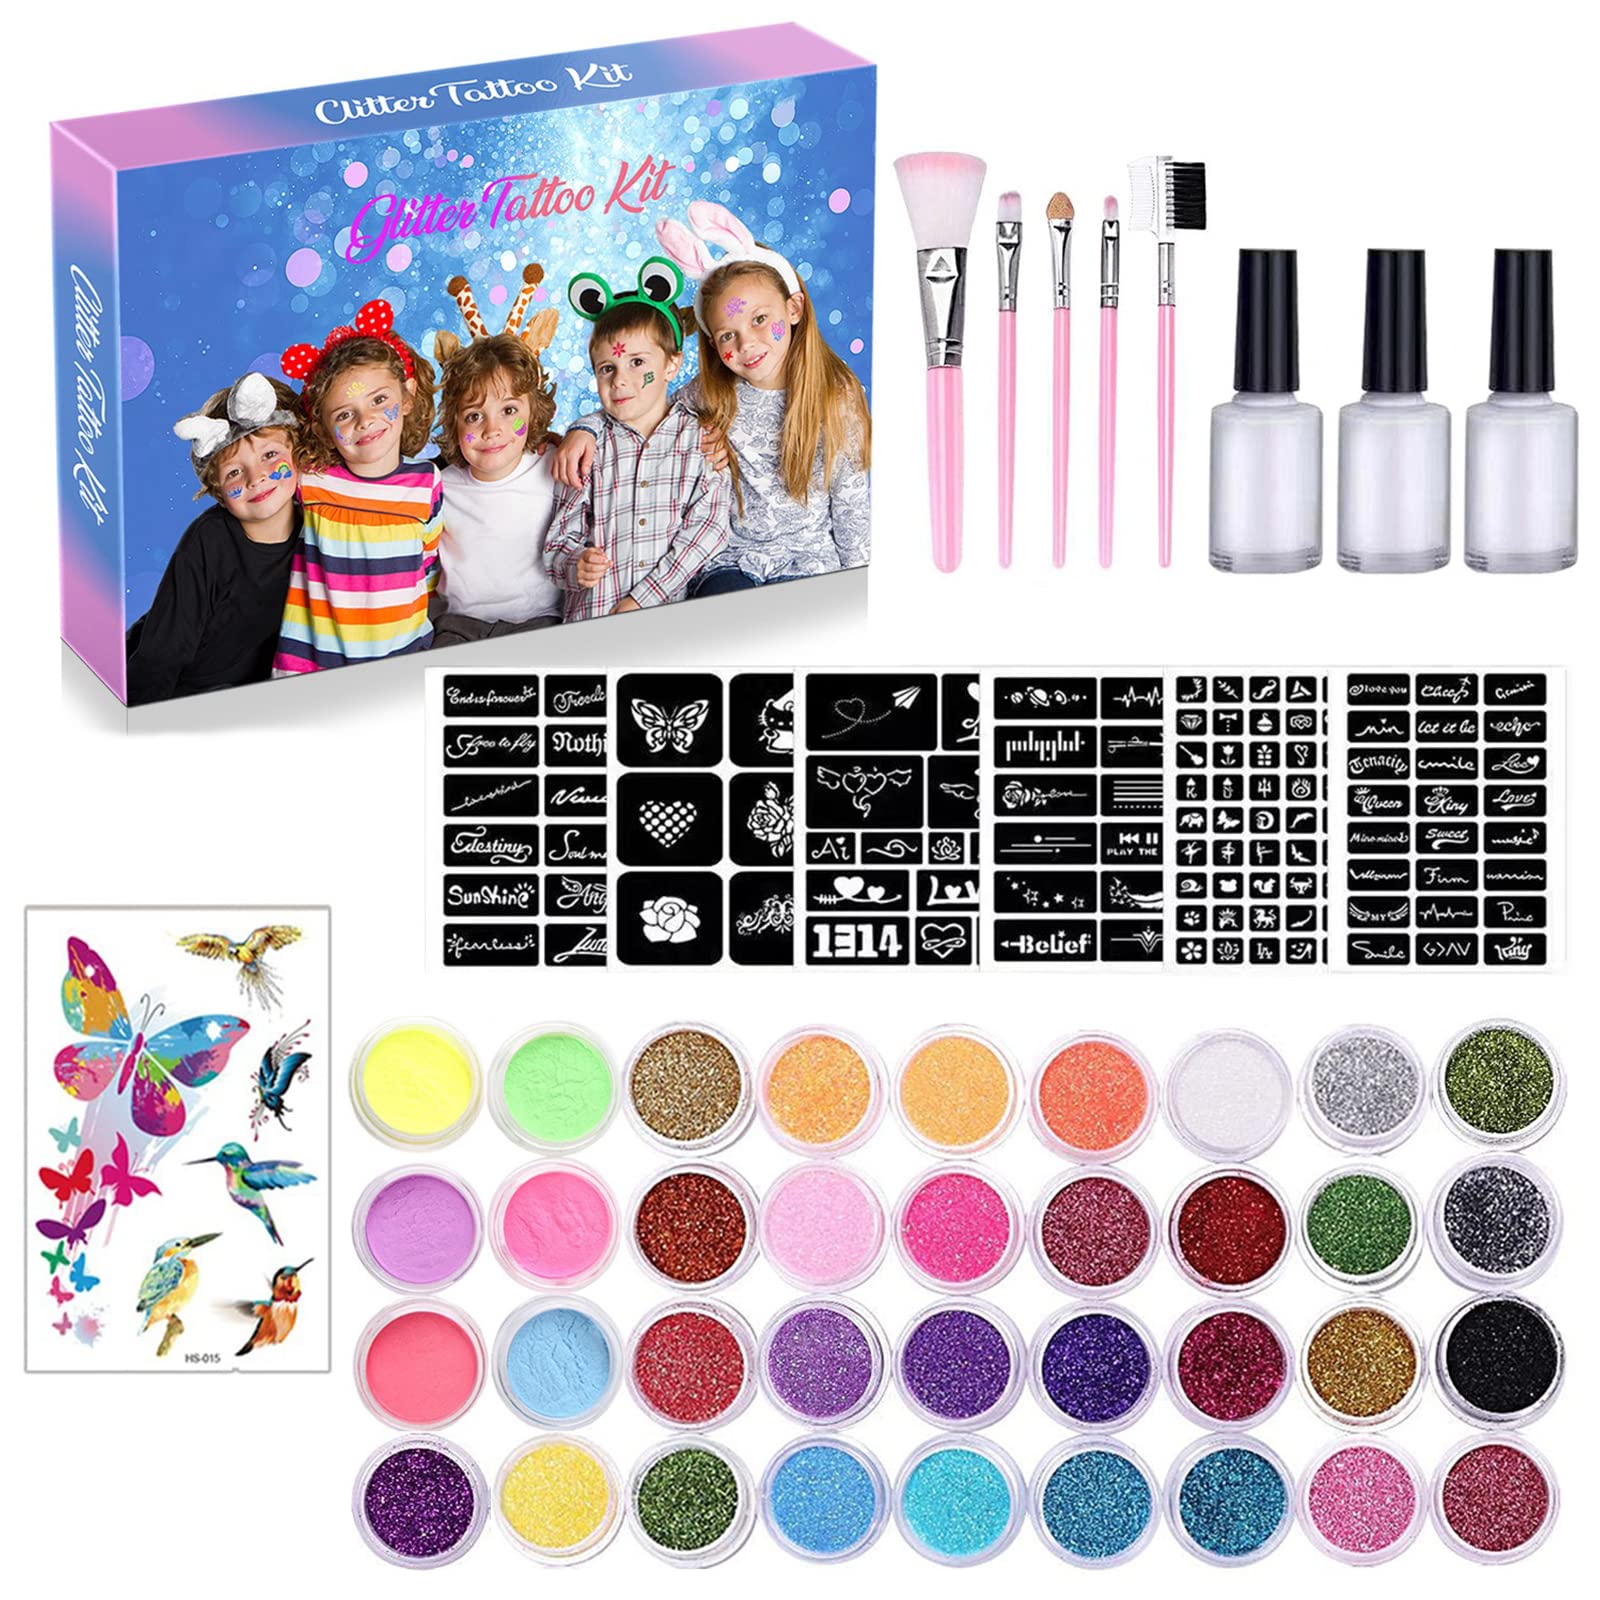 CkFyahp Temporary Glitter Tattoo Kit for Kids with 30 Glitter